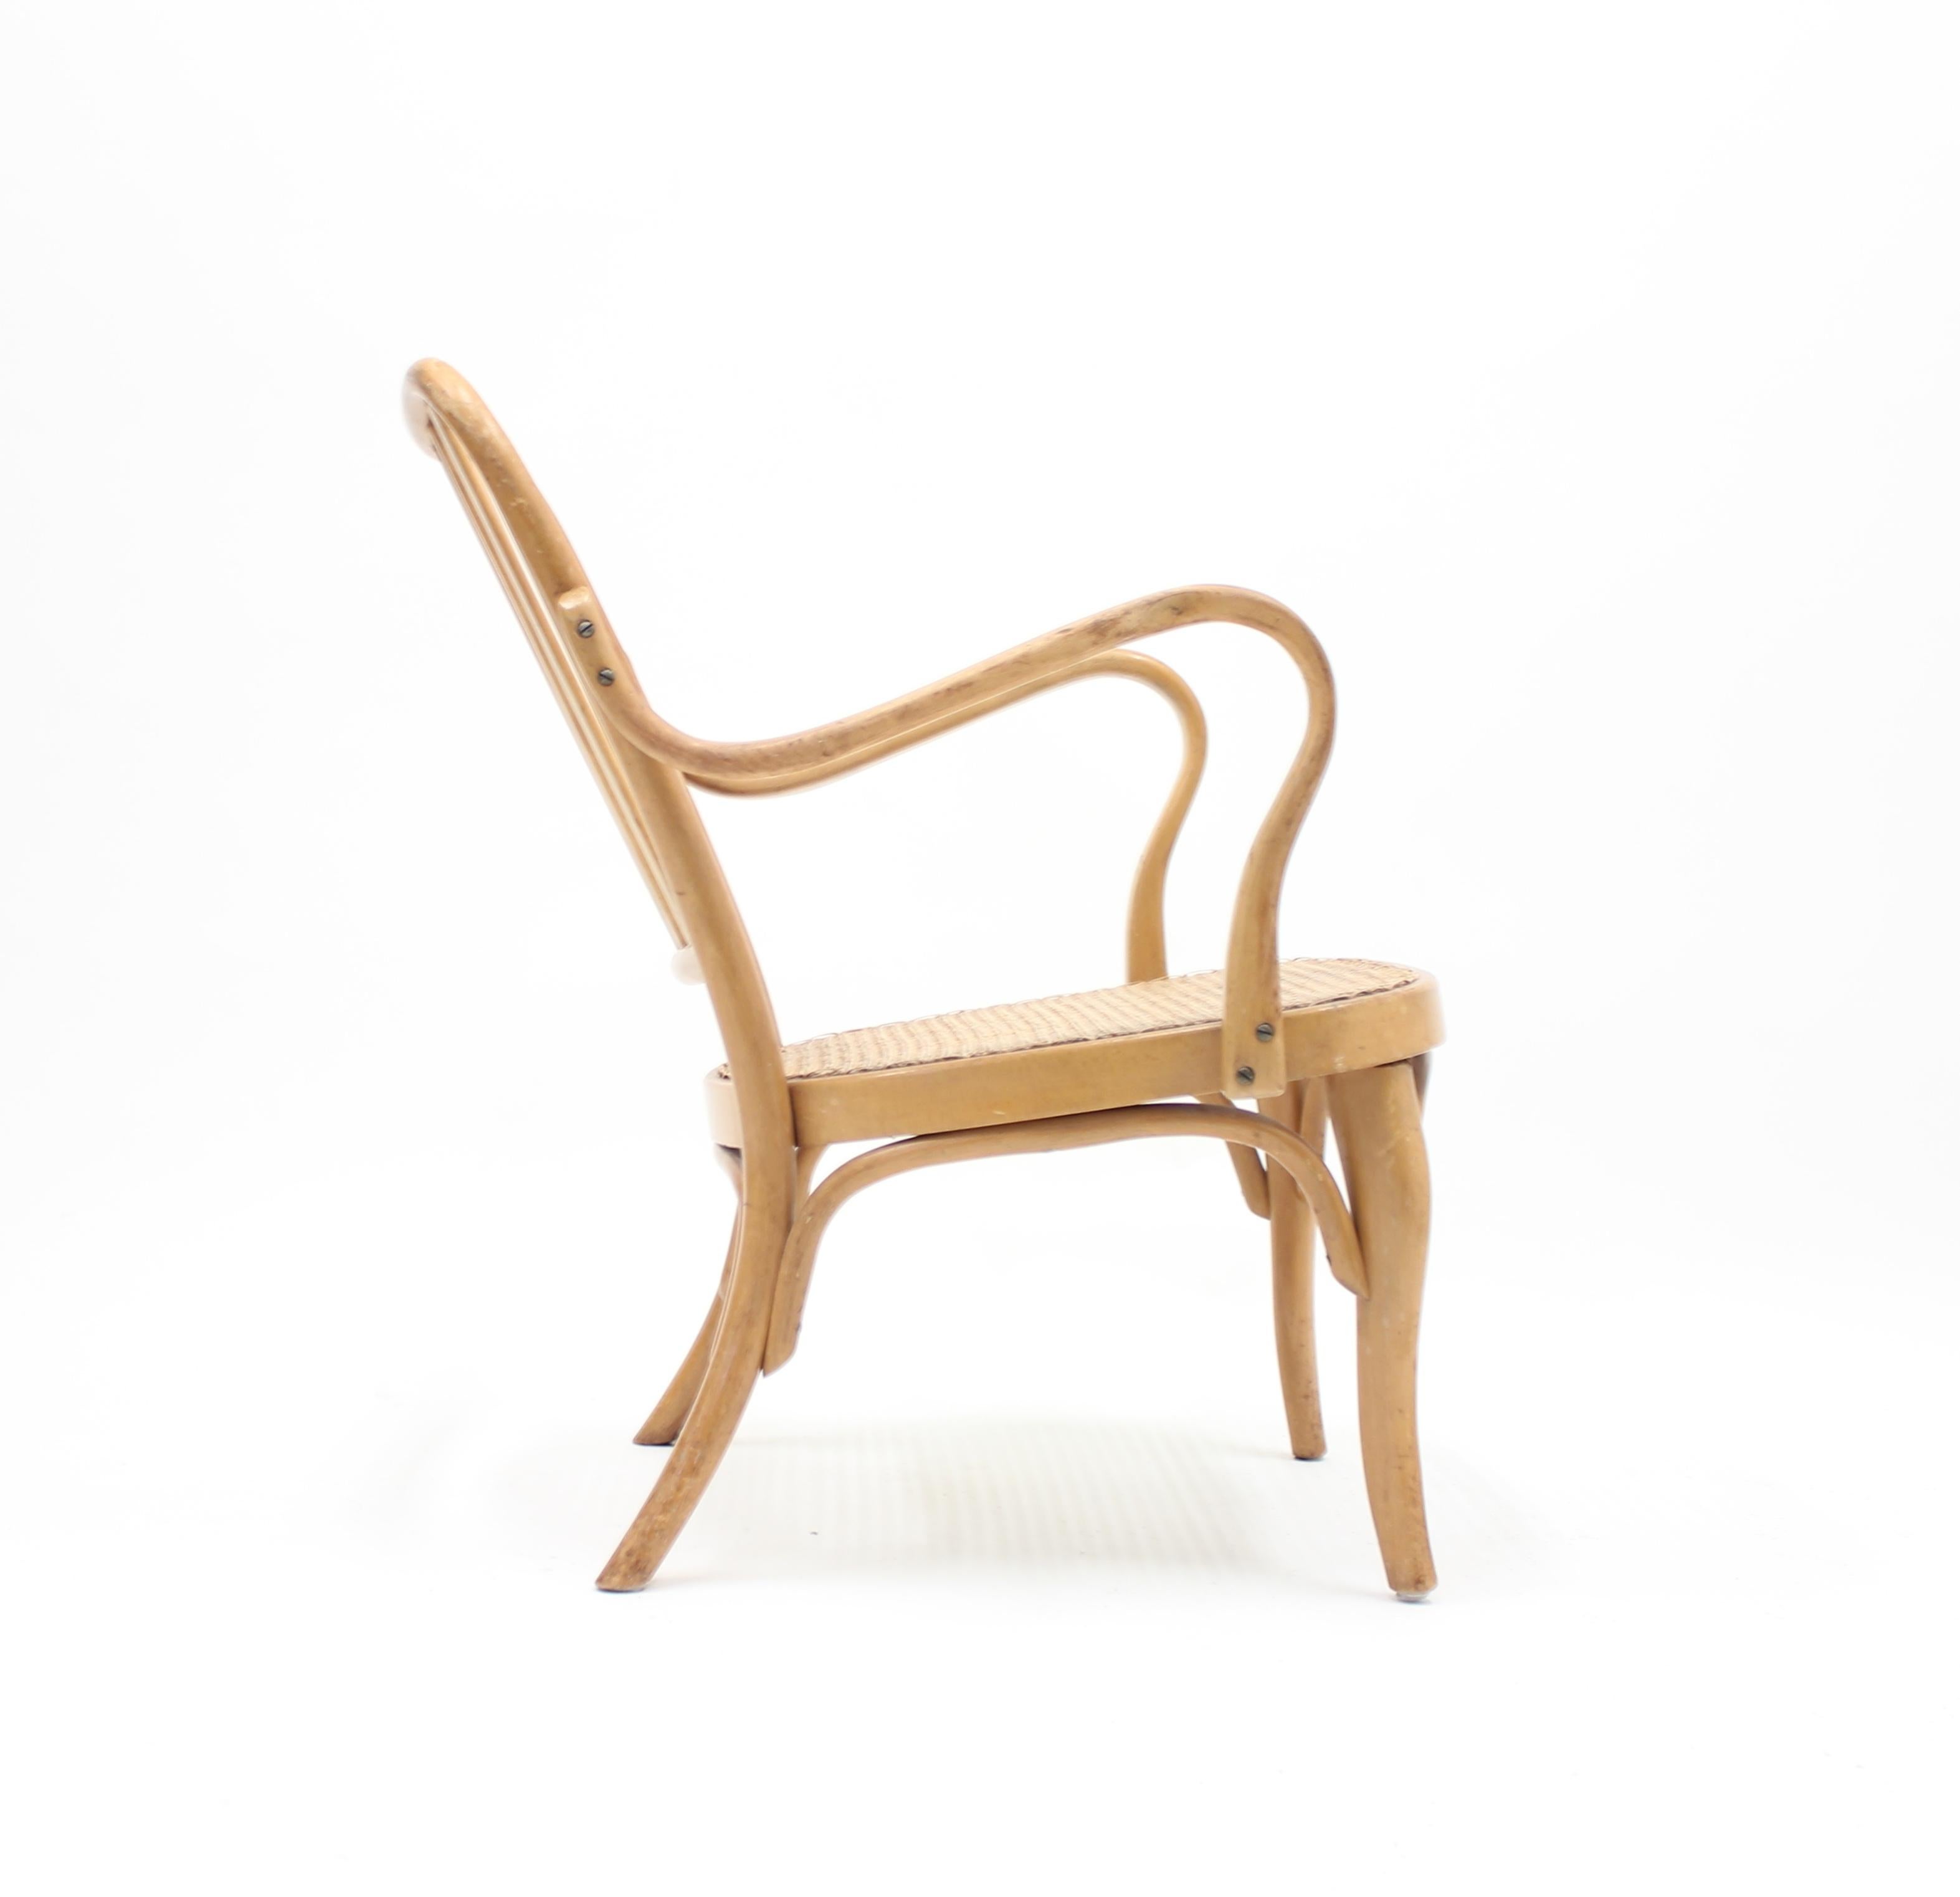 Austrian Model A 752 Bentwood Chair by Josef Frank for Thonet, 1930s